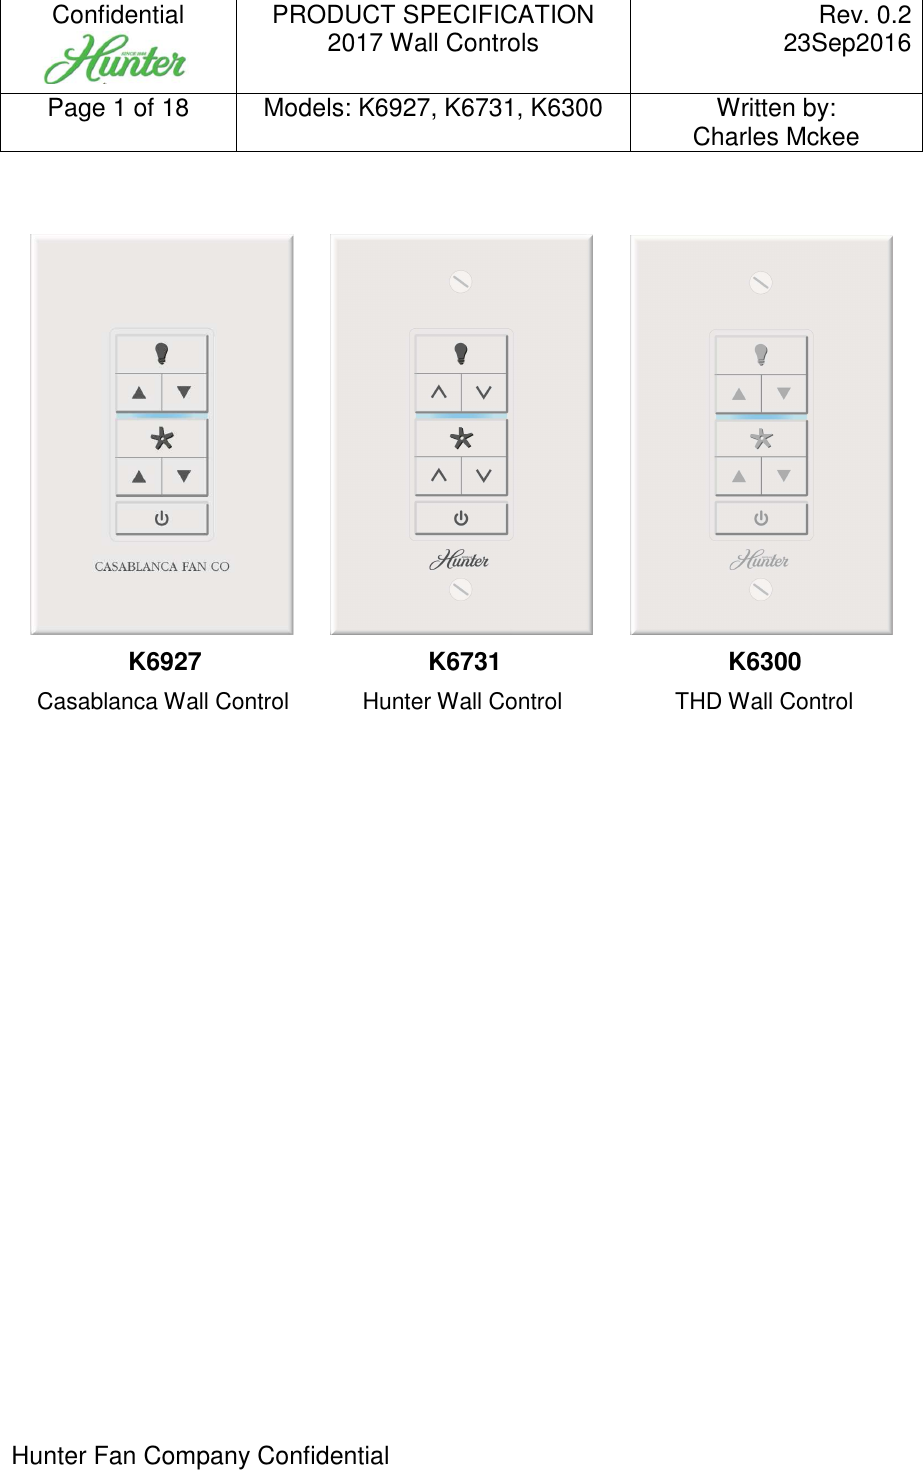 Confidential   PRODUCT SPECIFICATION 2017 Wall Controls  Rev. 0.2     23Sep2016 Page 1 of 18  Models: K6927, K6731, K6300  Written by: Charles Mckee  Hunter Fan Company Confidential                K6927            K6731            K6300     Casablanca Wall Control           Hunter Wall Control            THD Wall Control  